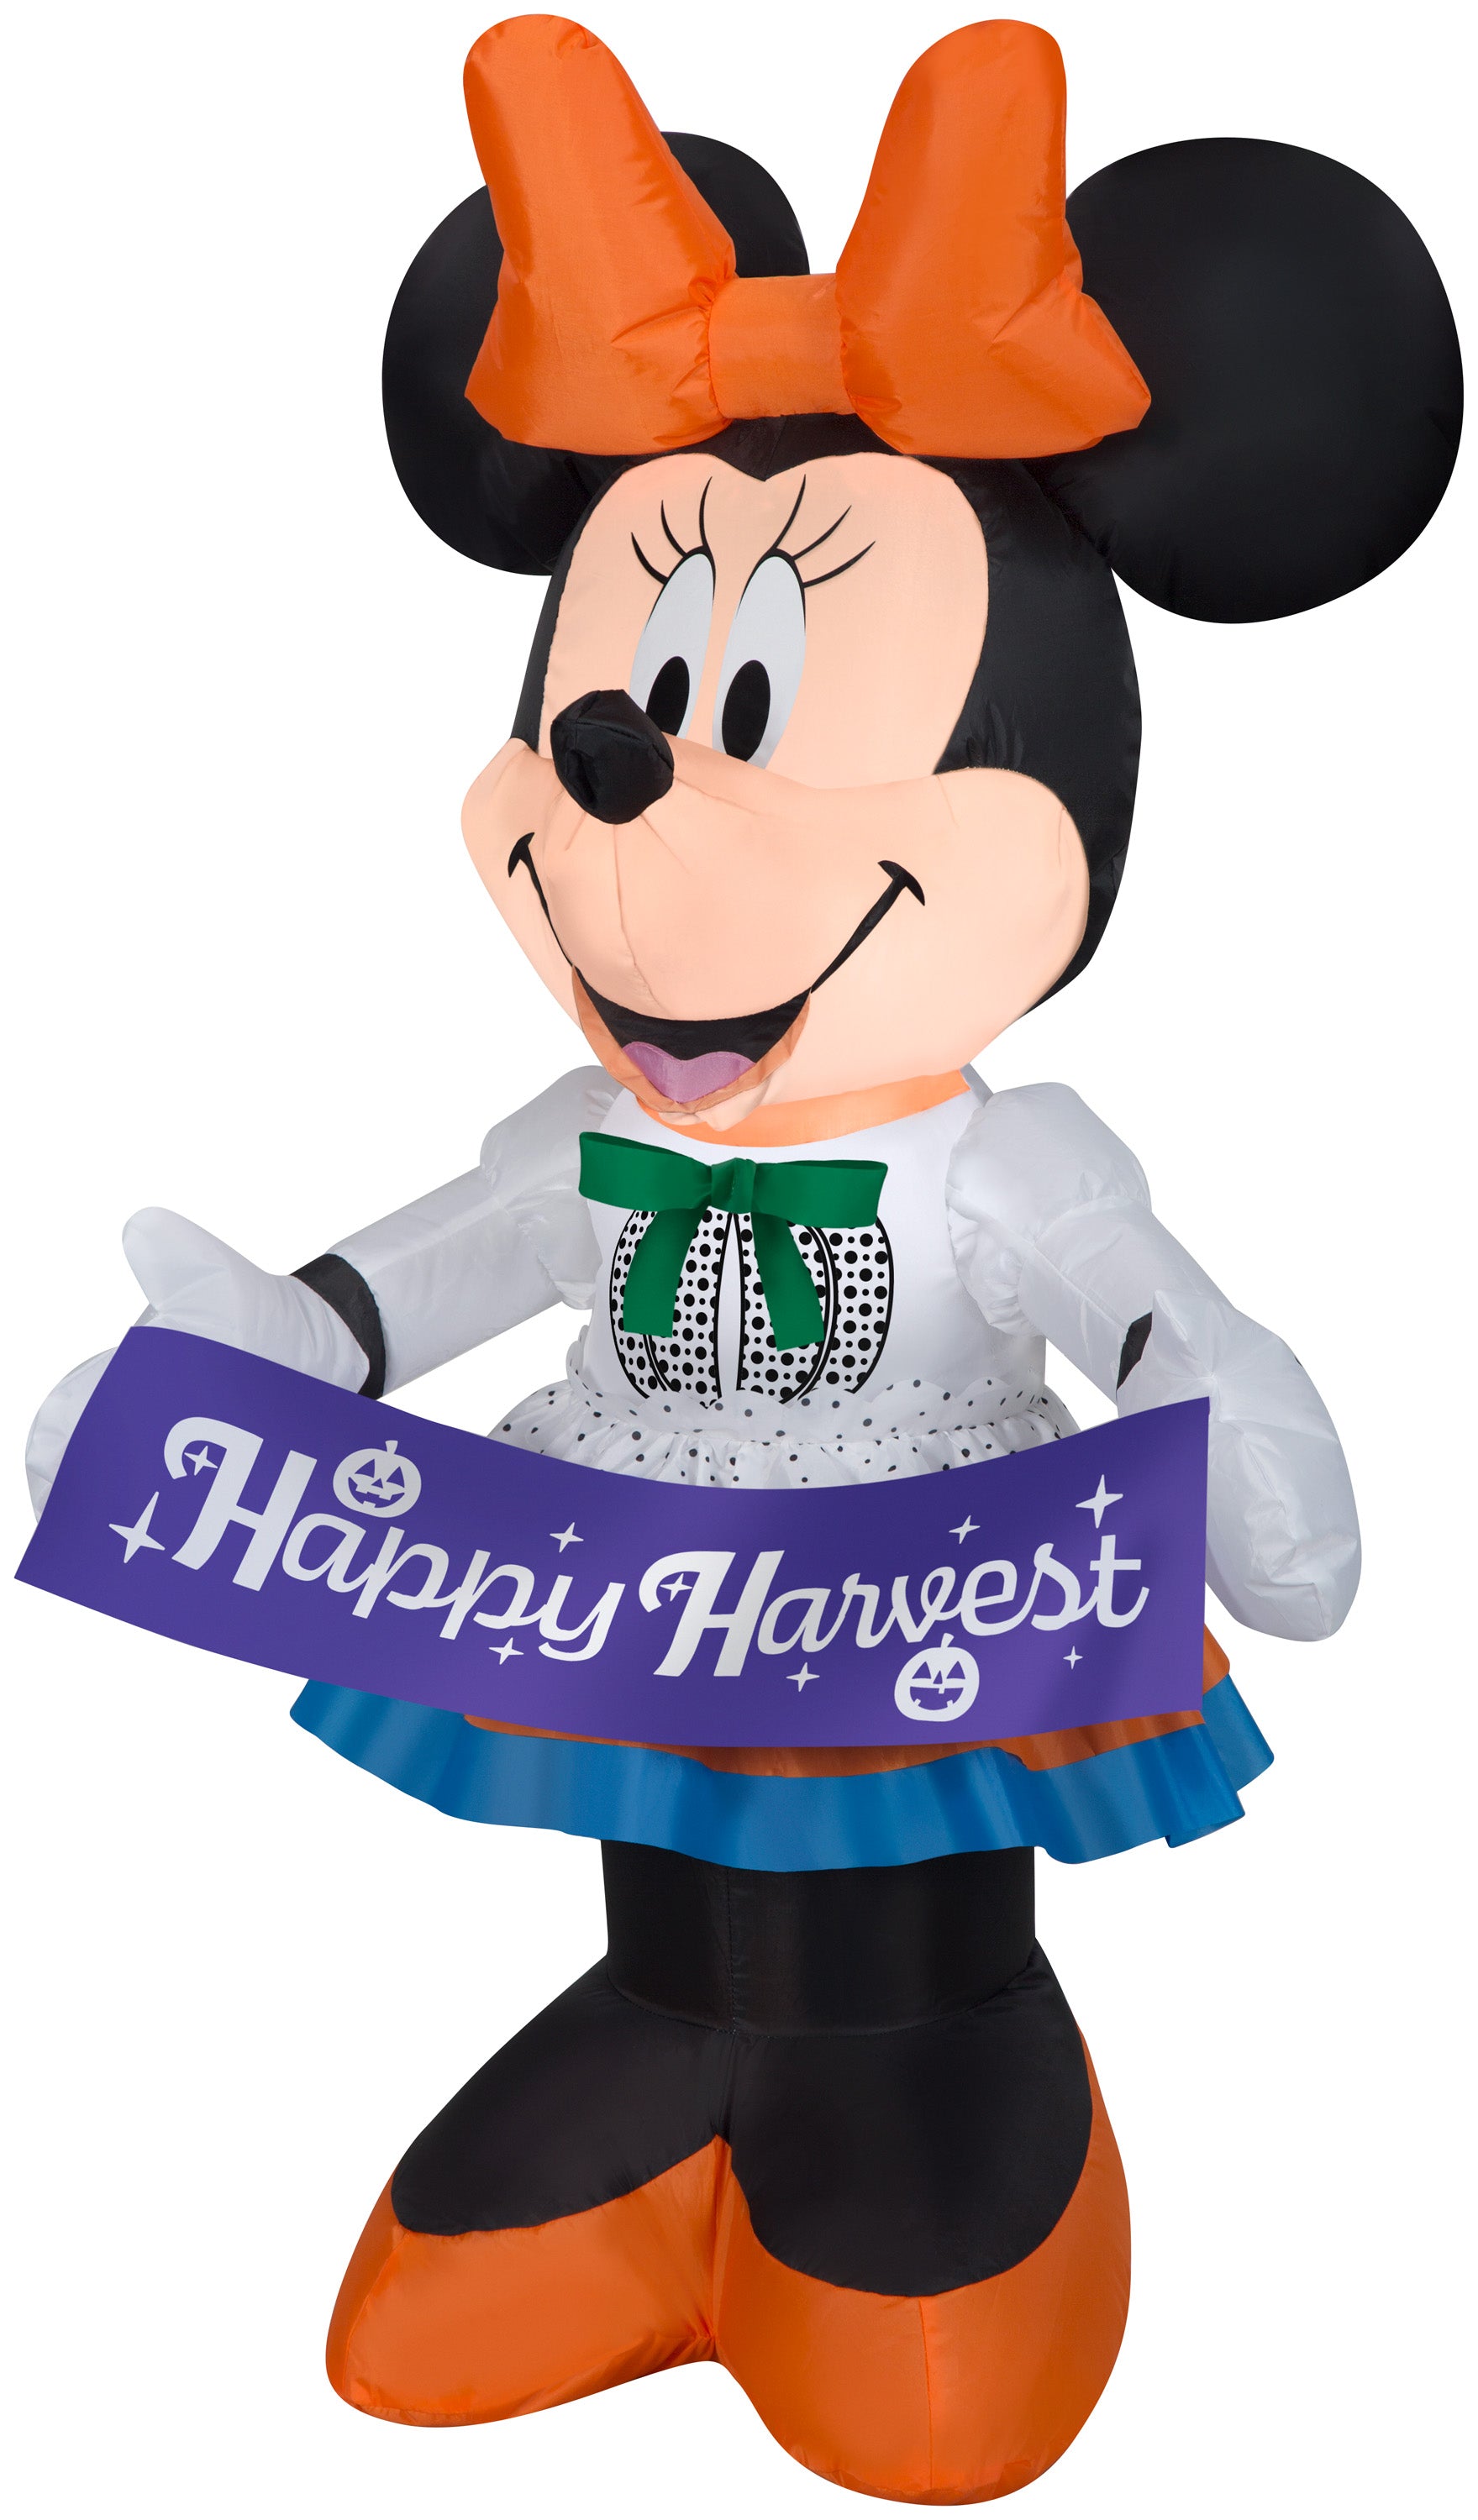 Gemmy Airblown Harvest Minnie Mouse Disney, 3.5 ft Tall, Multicolored